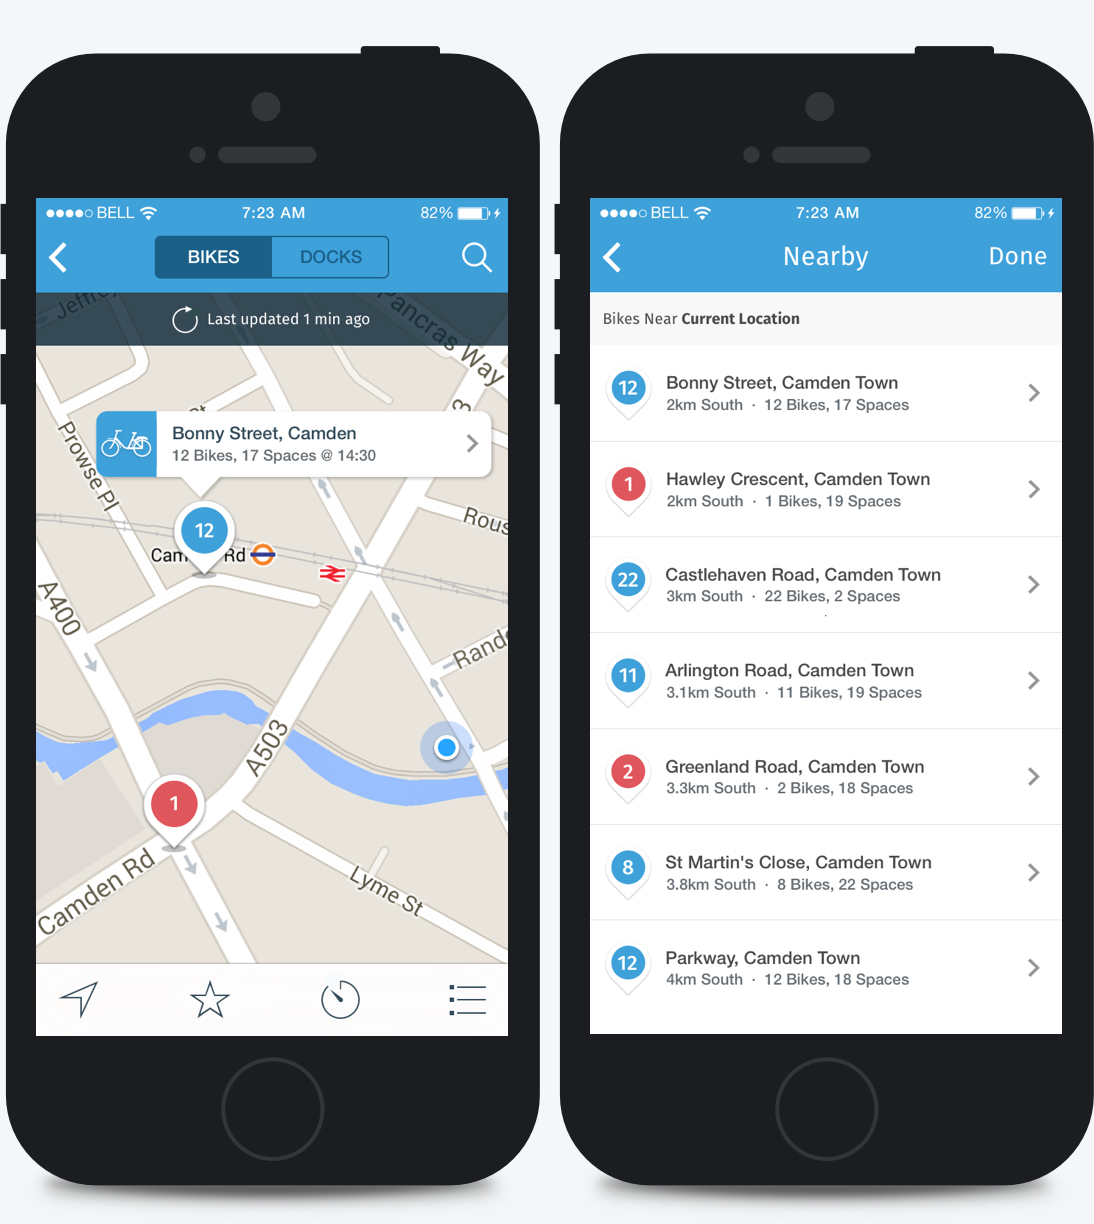 The Barclays Bikes Application 'nearby' map screen and the 'nearby' list screen.